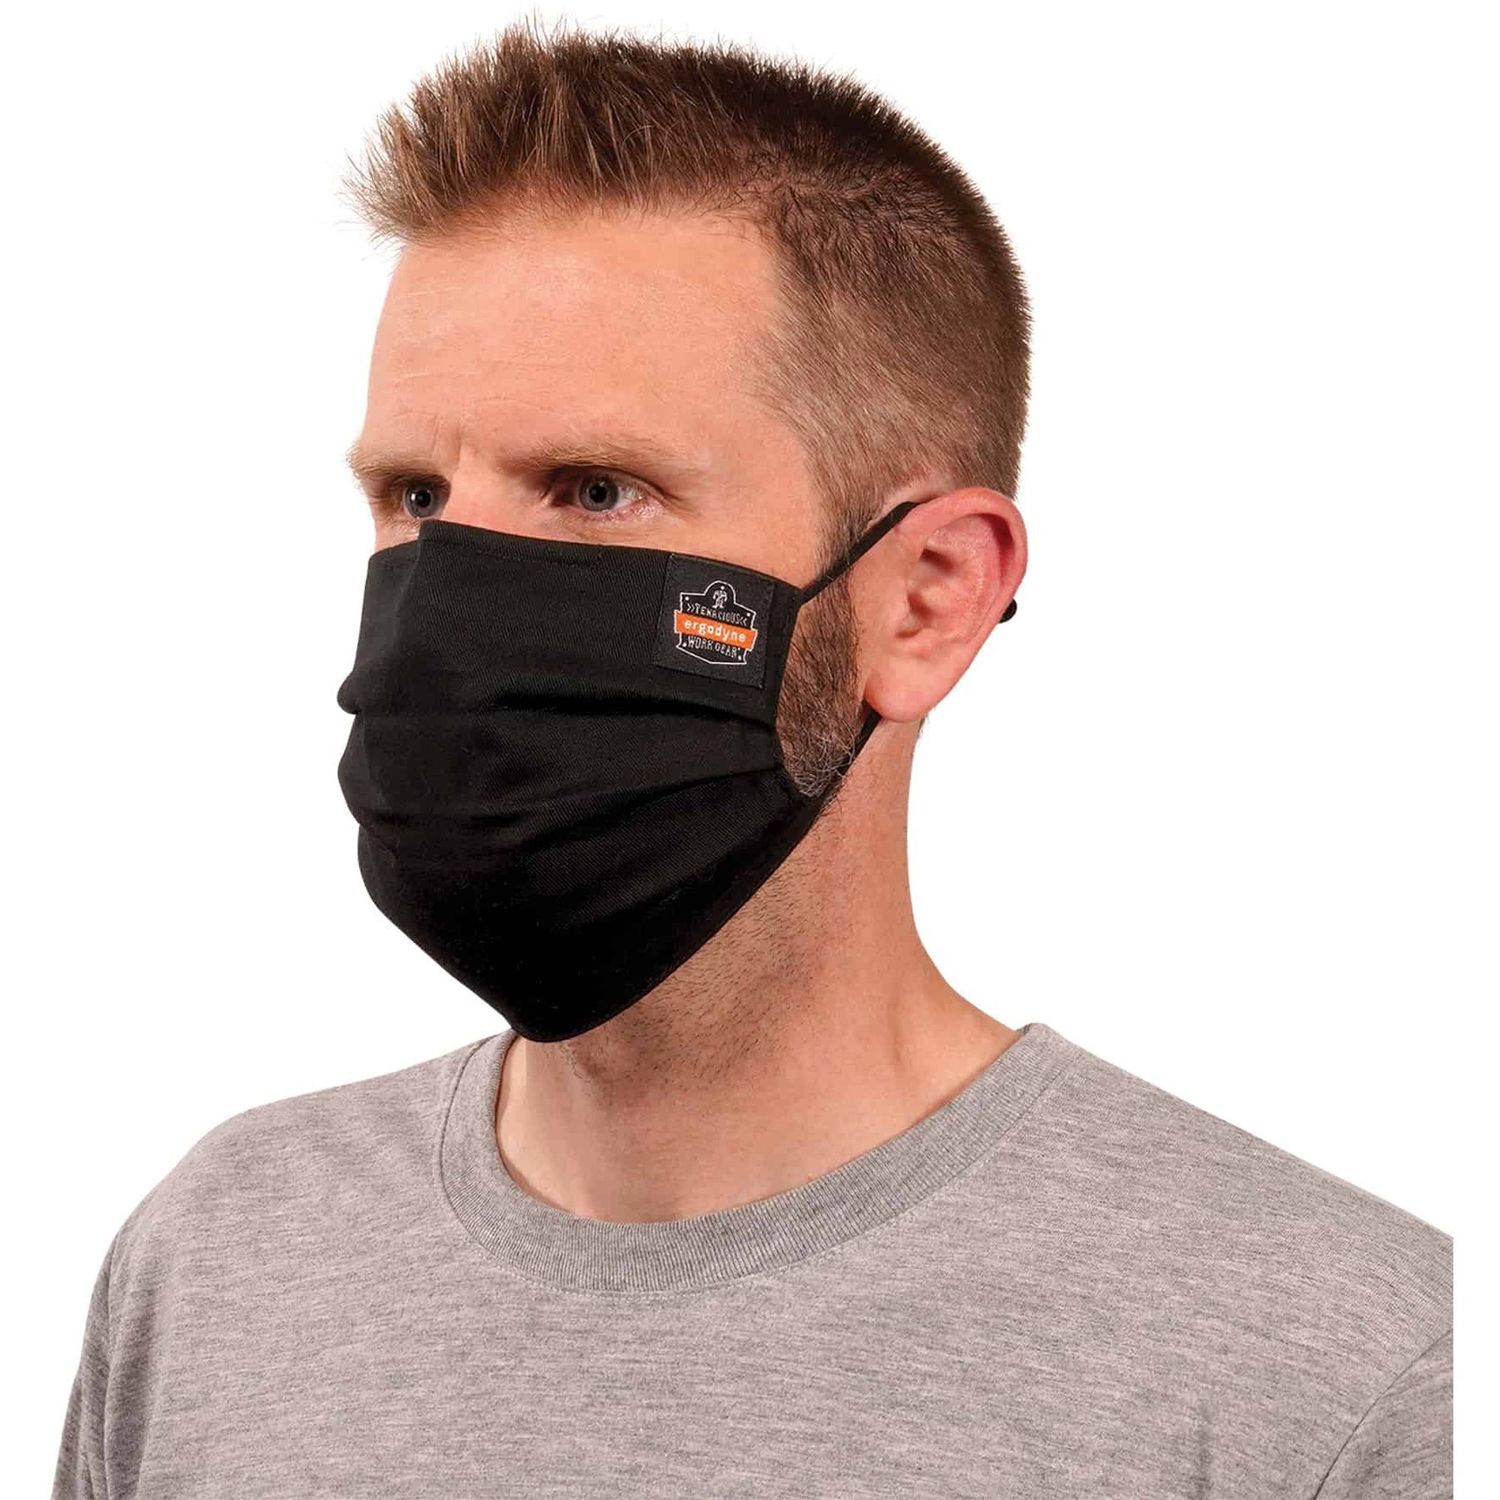 8801 Pleated Face Cover Mask Adjustable Nose Clip, Adjustable Ear Loop, Anti-odor, Antimicrobial, Reusable, Machine Washable, Quick Drying, Cotton Twill, Polyester, Black, 1 Pack